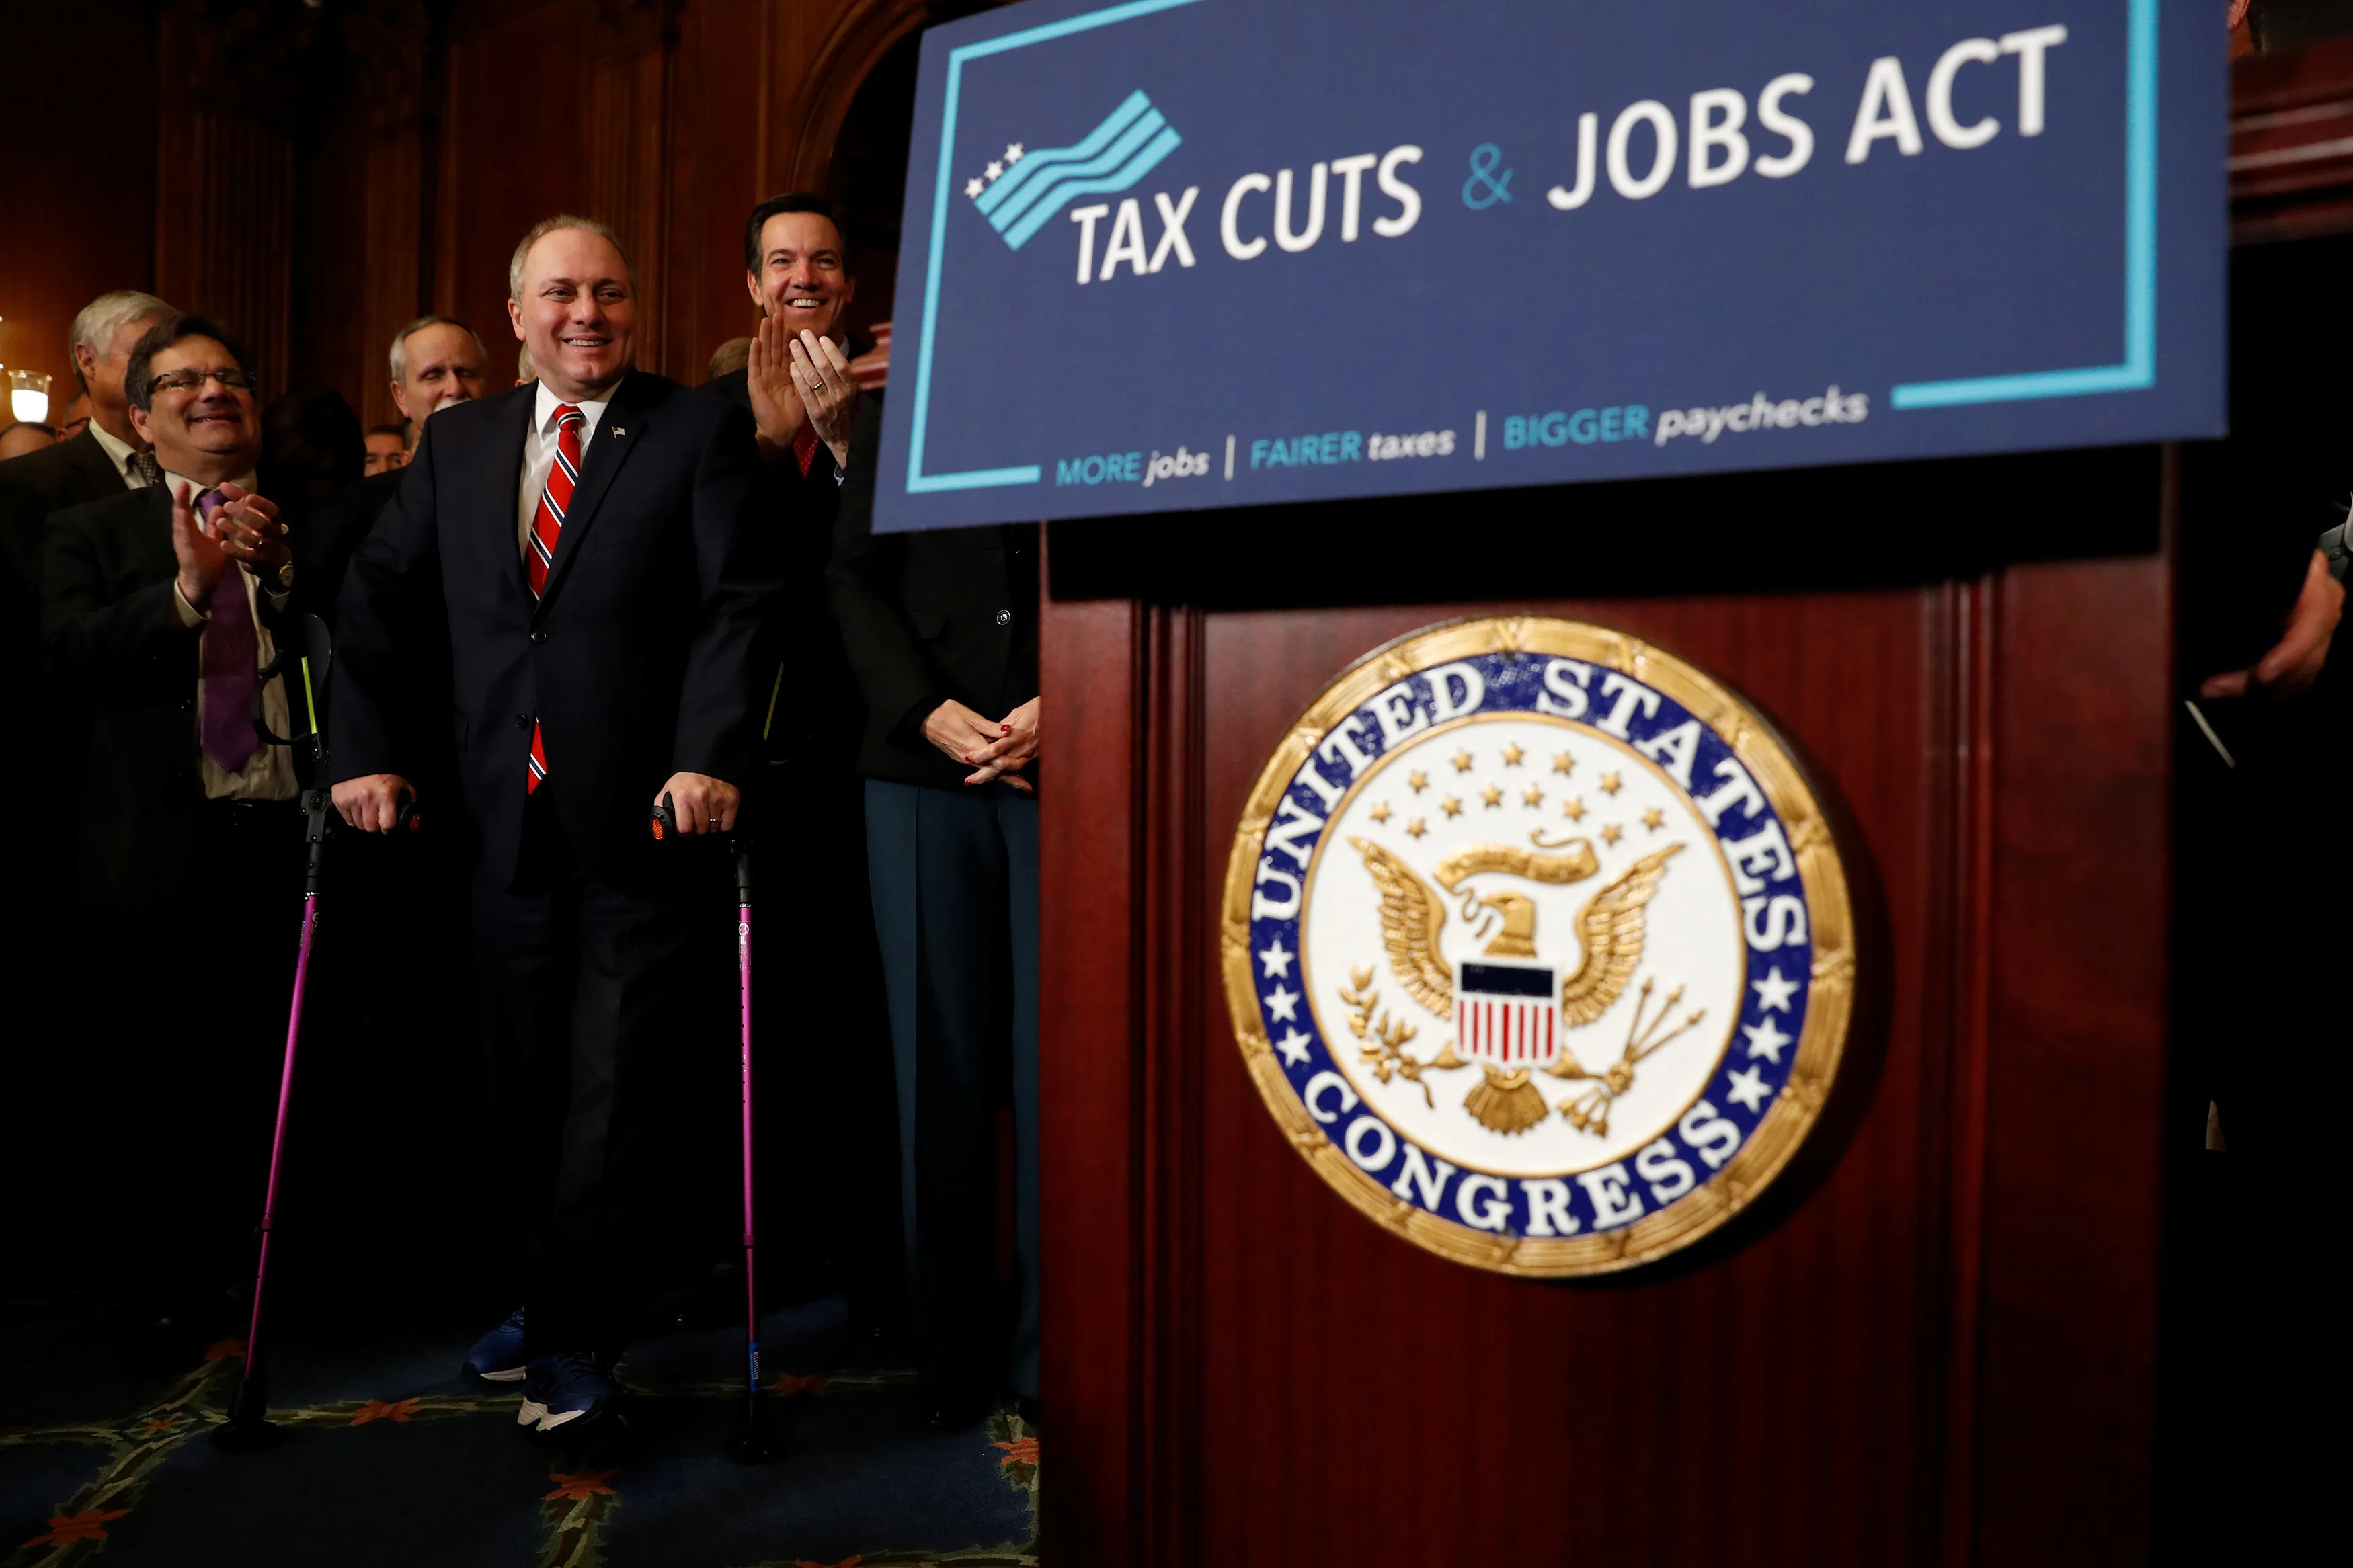 tax cuts and job act s corporation 20%